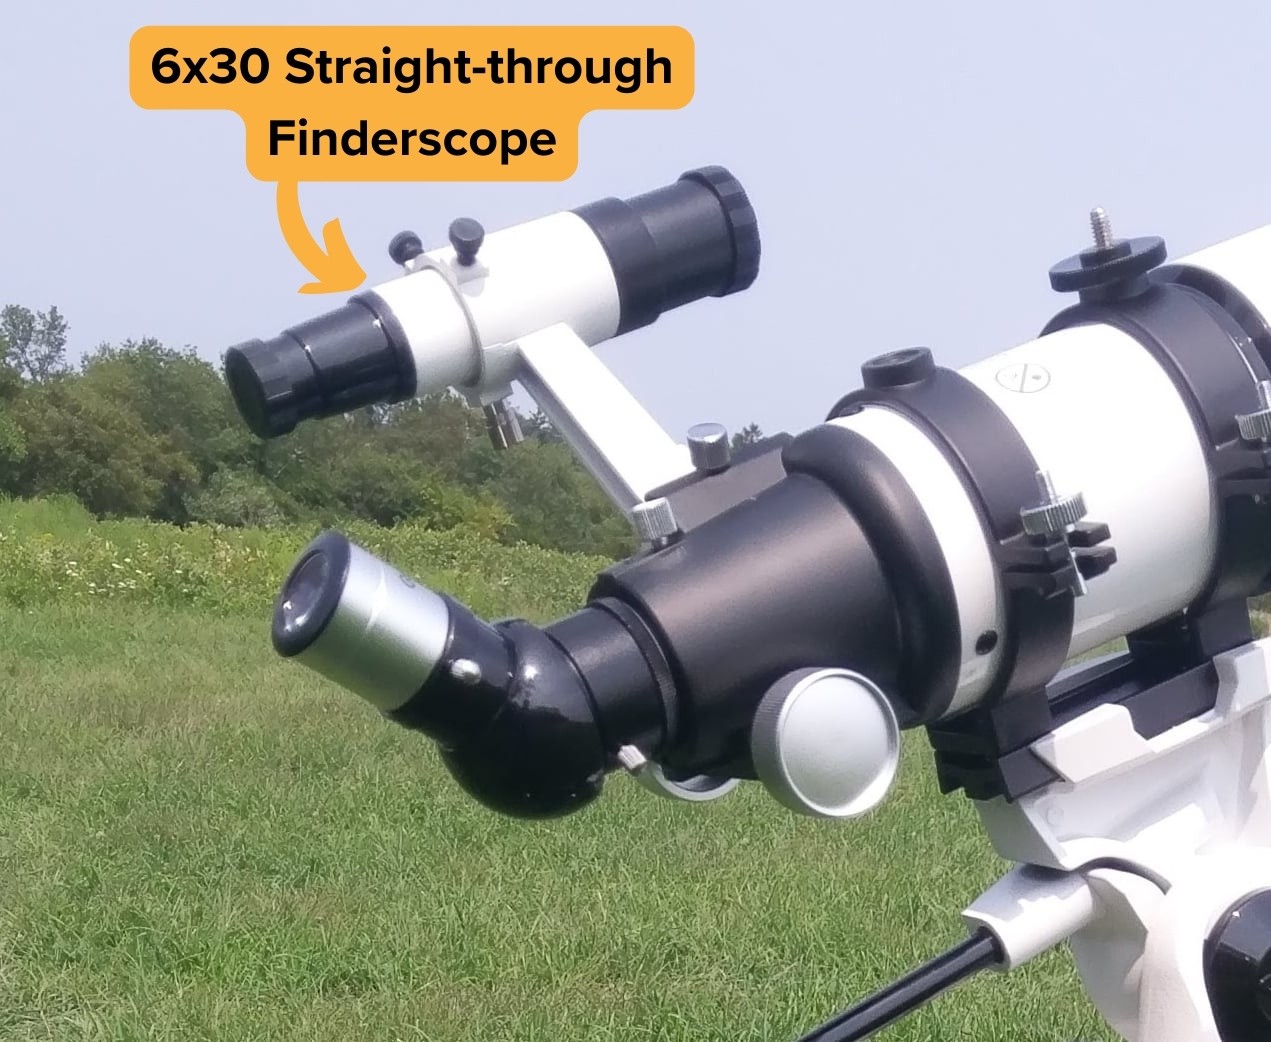 6X30 straight-through finderscope that is included with our Ed Anderson's 80 mm refractor.